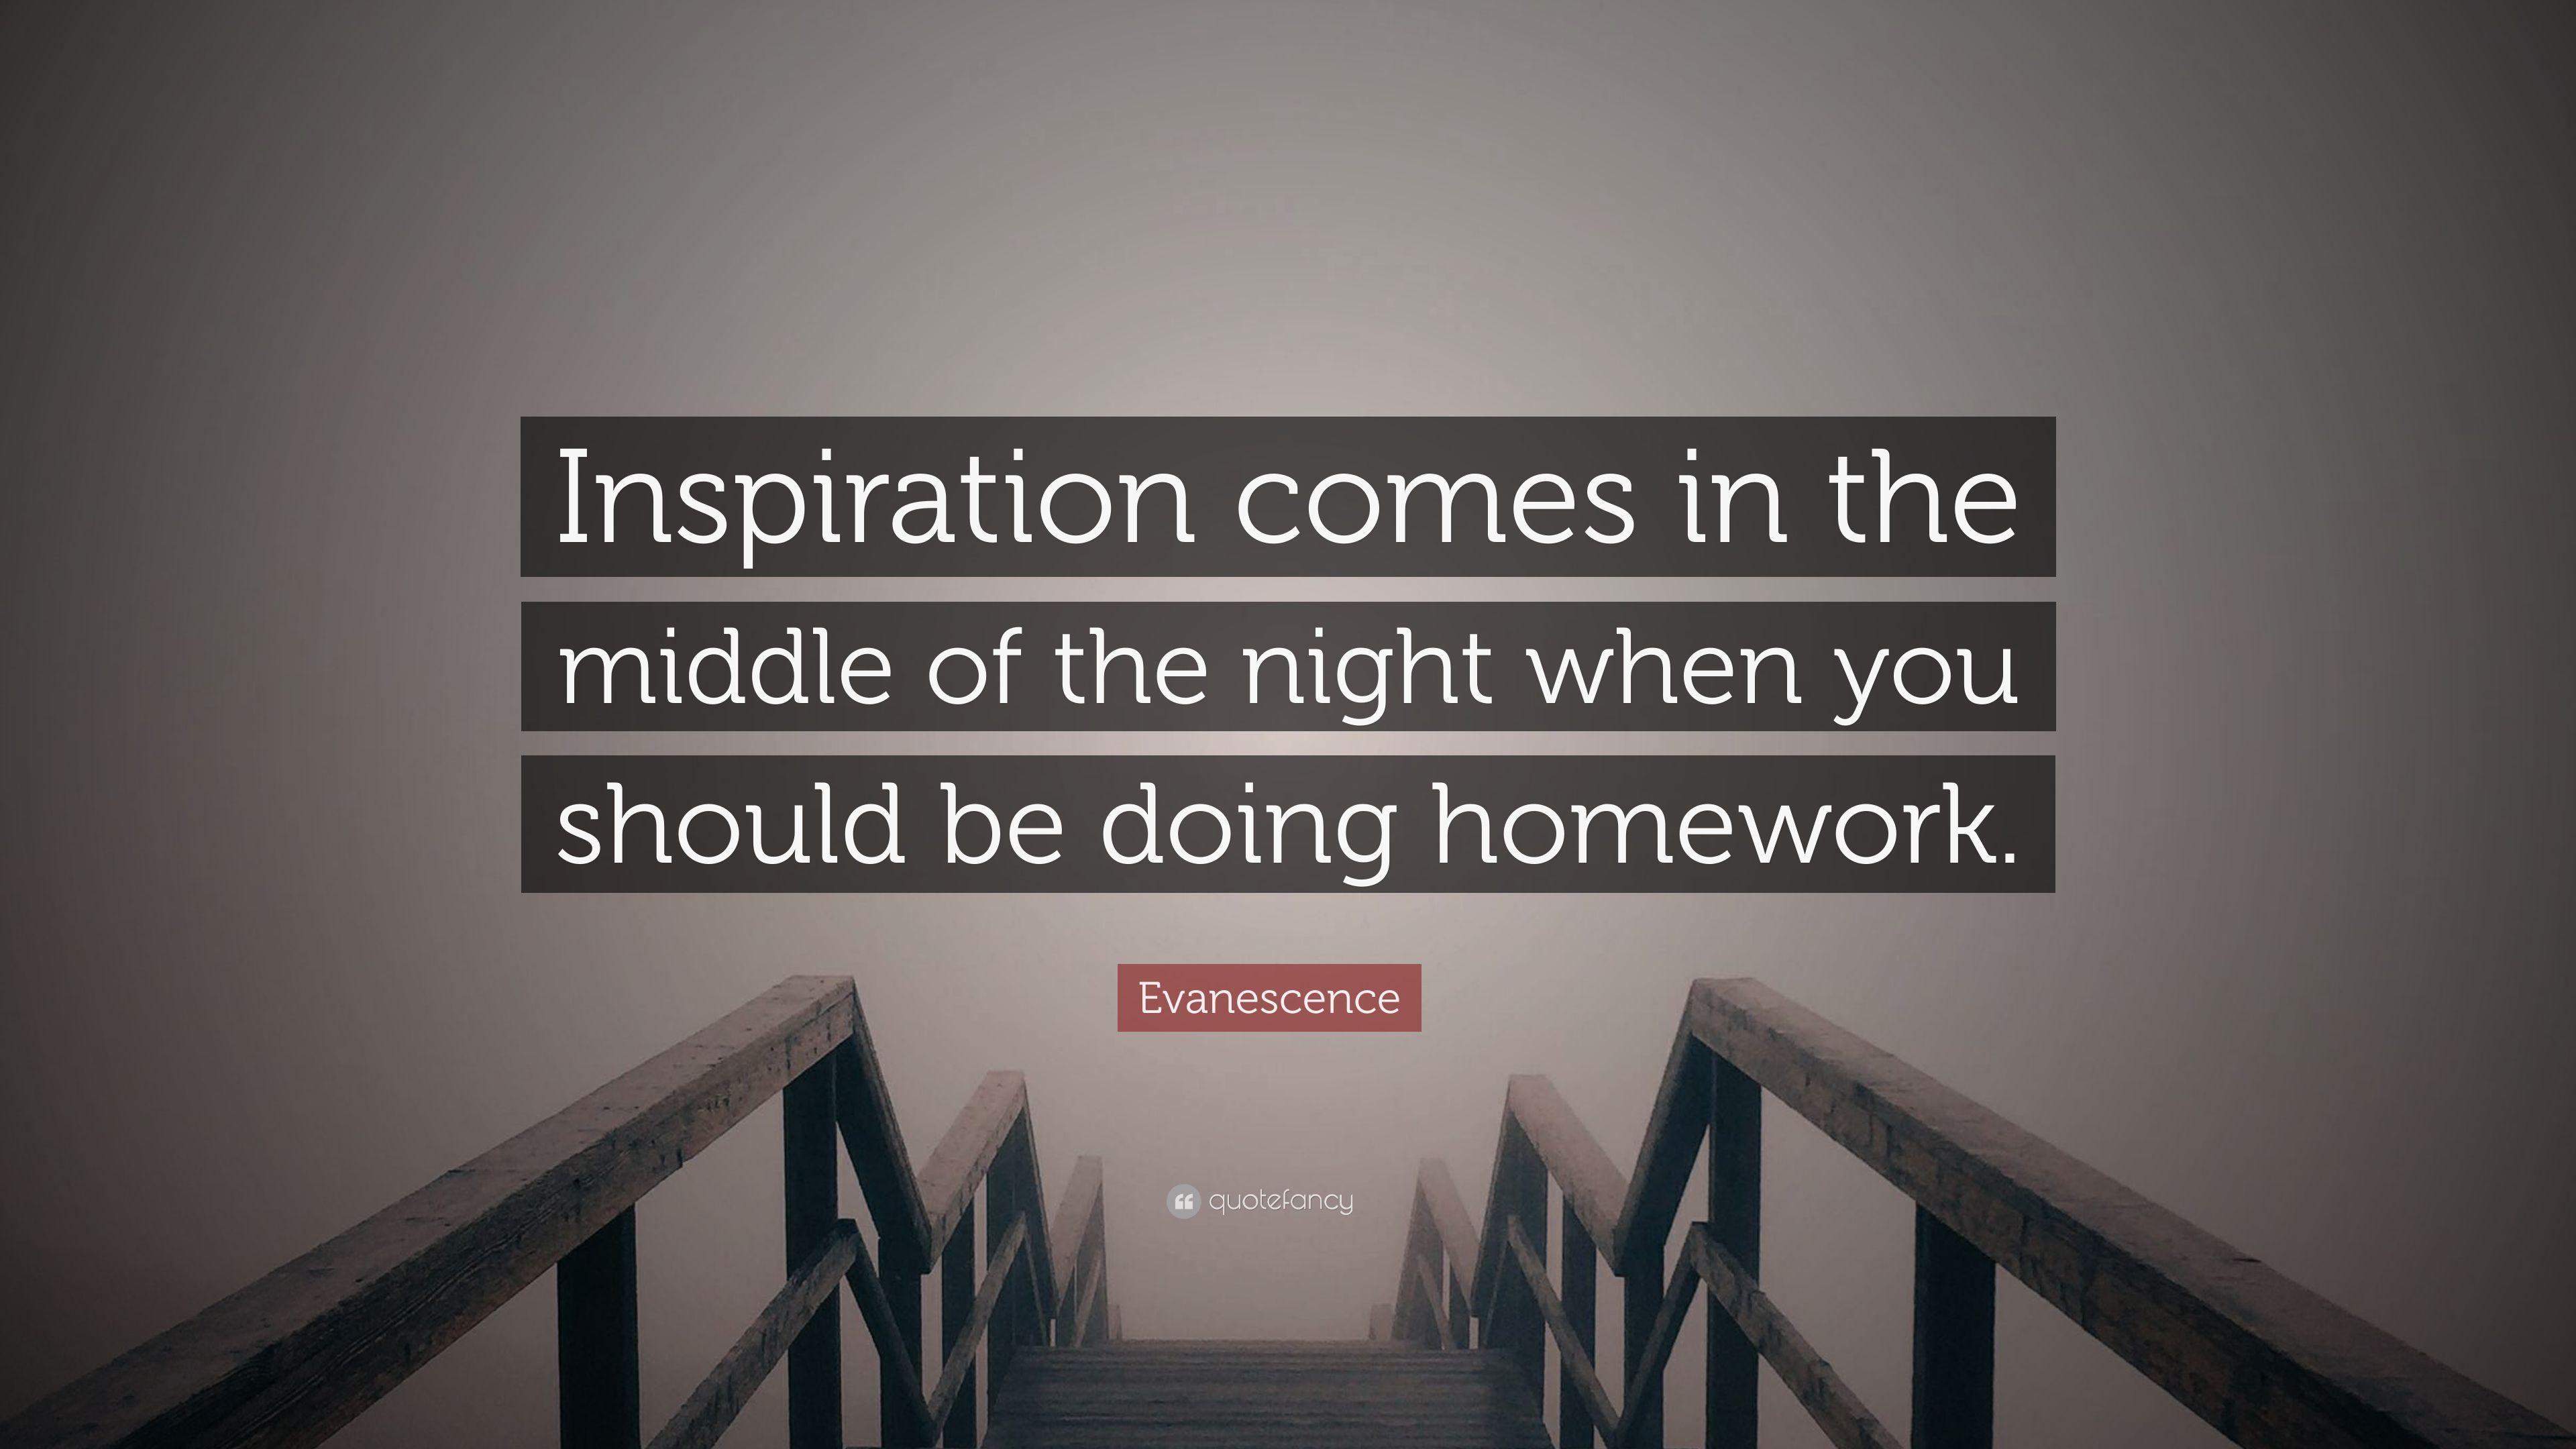 Evanescence Quote: “Inspiration comes in the middle of the night